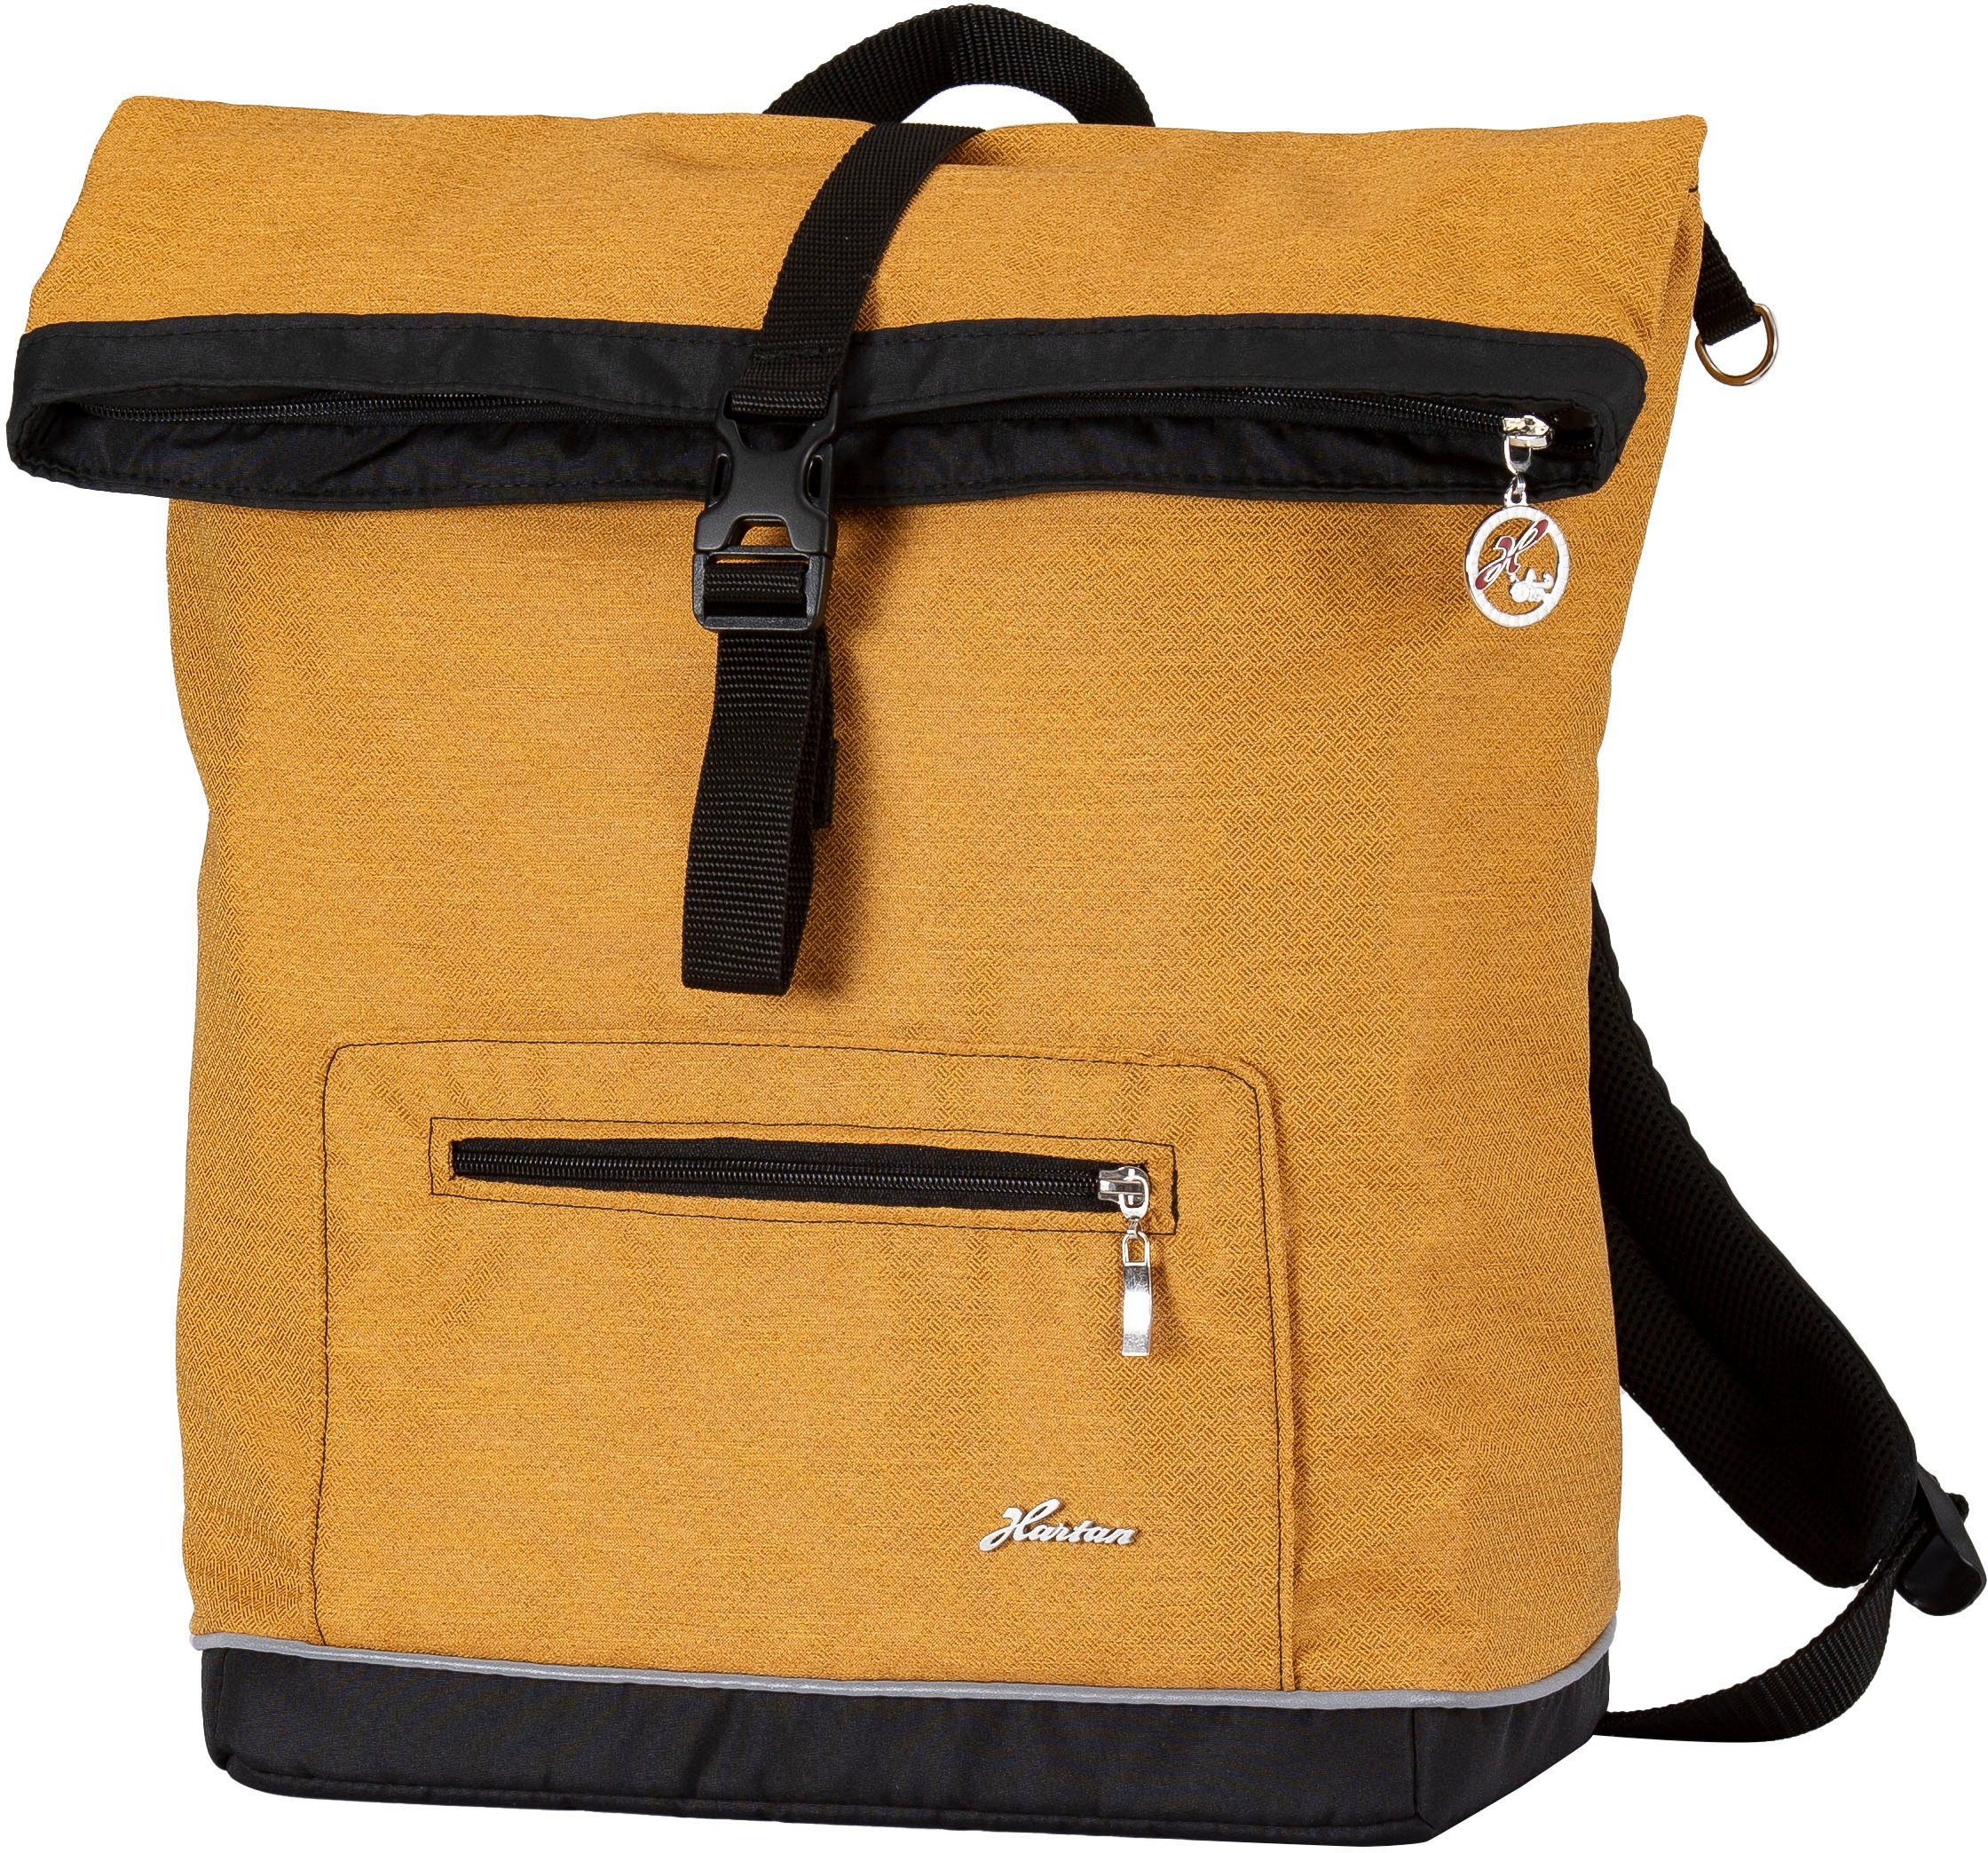 Hartan Wickelrucksack Space bag - Casual Collection, mit Thermofach; Made in Germany forest friends